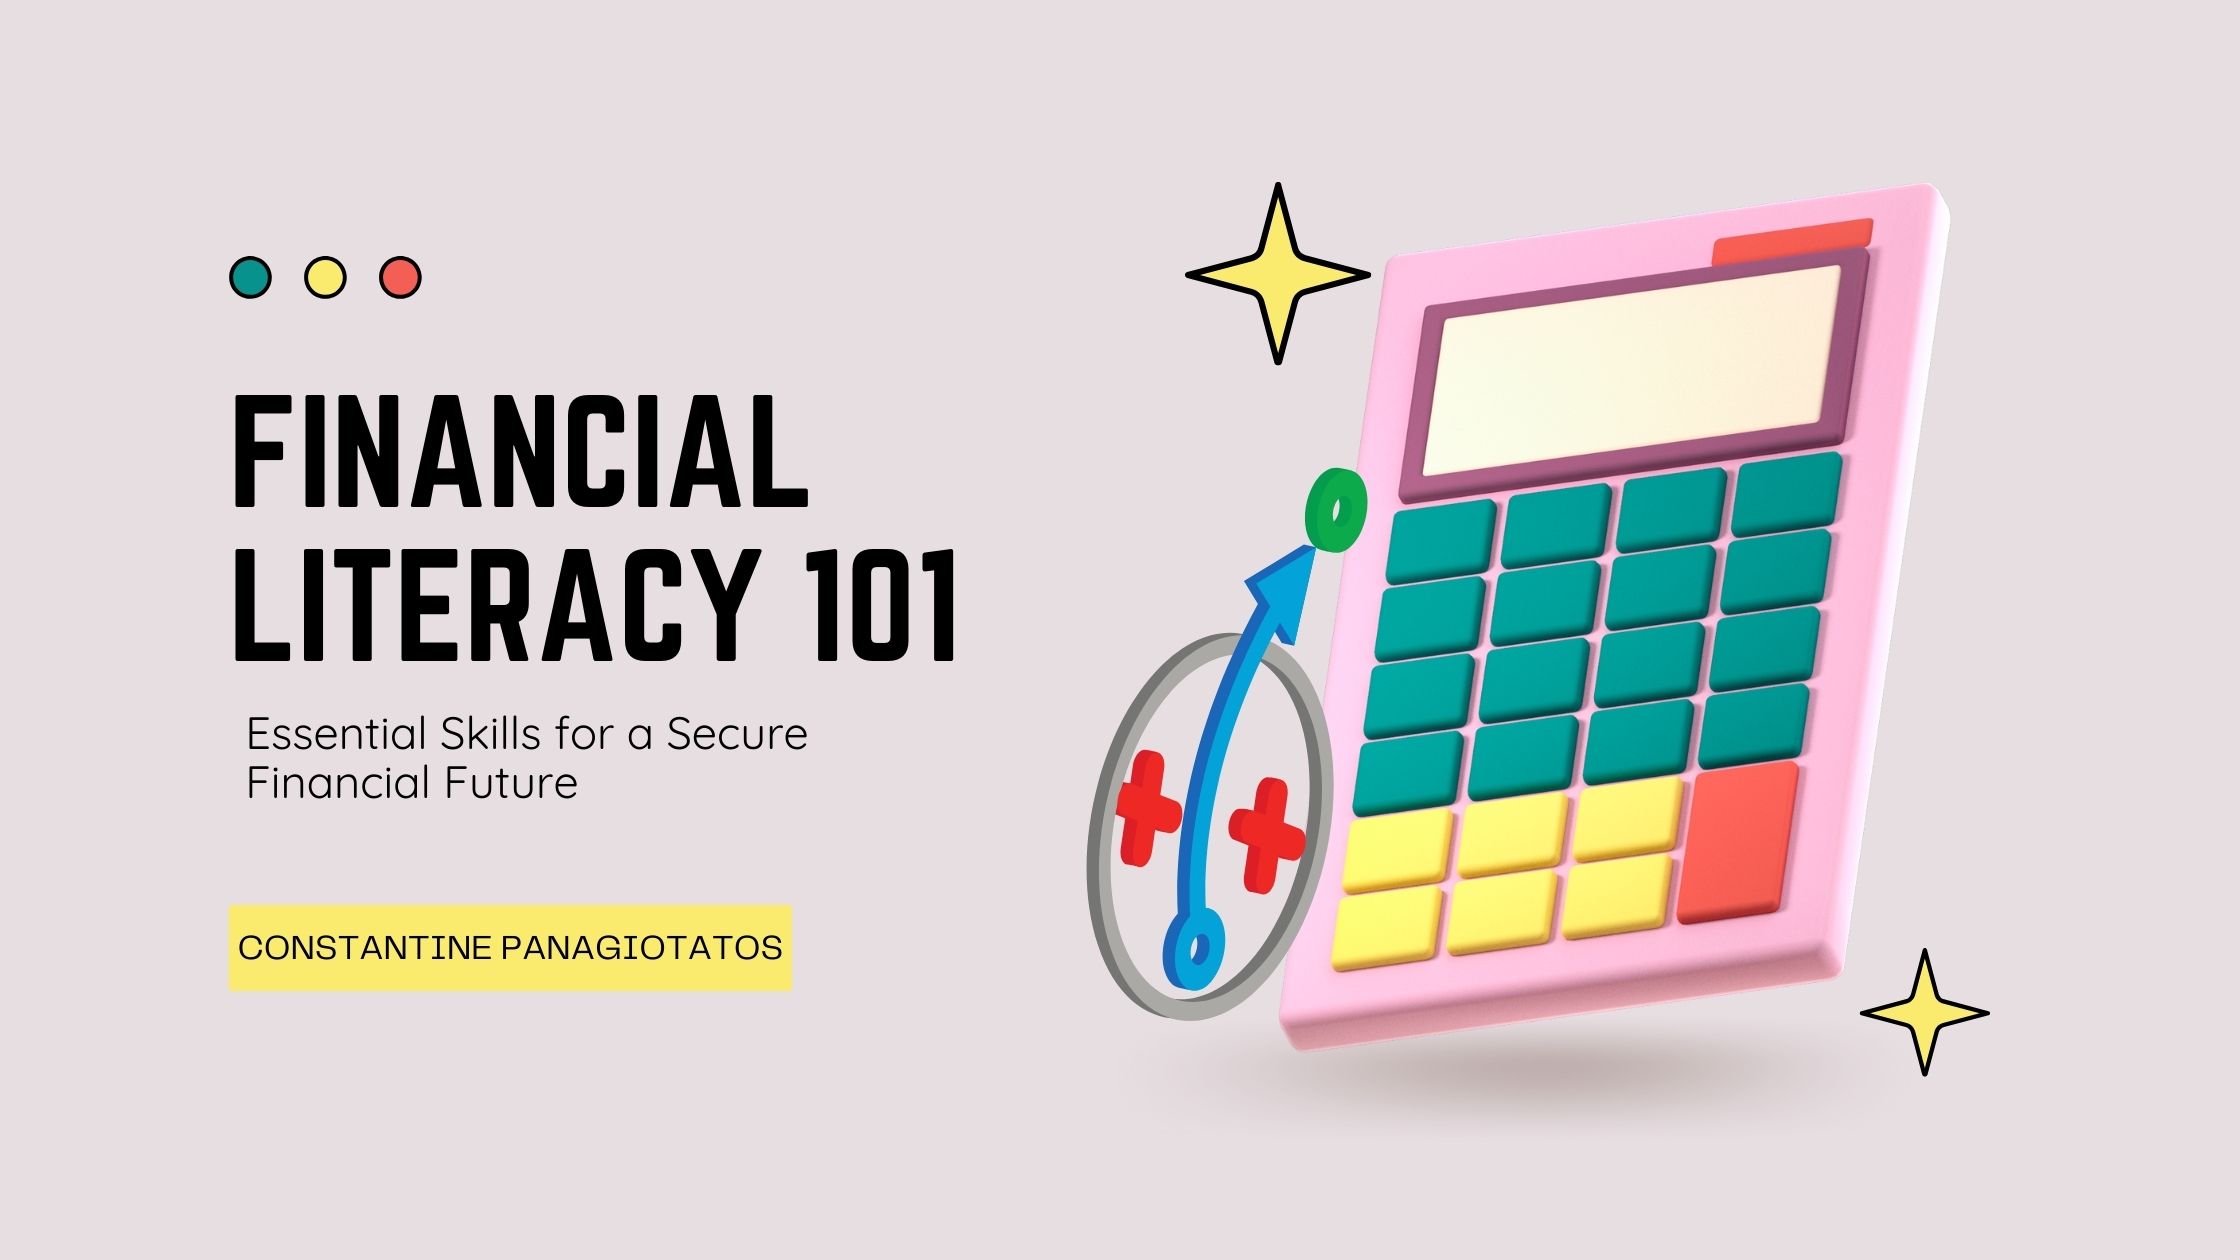 Financial Literacy 101: Essential Skills for a Secure Financial Future